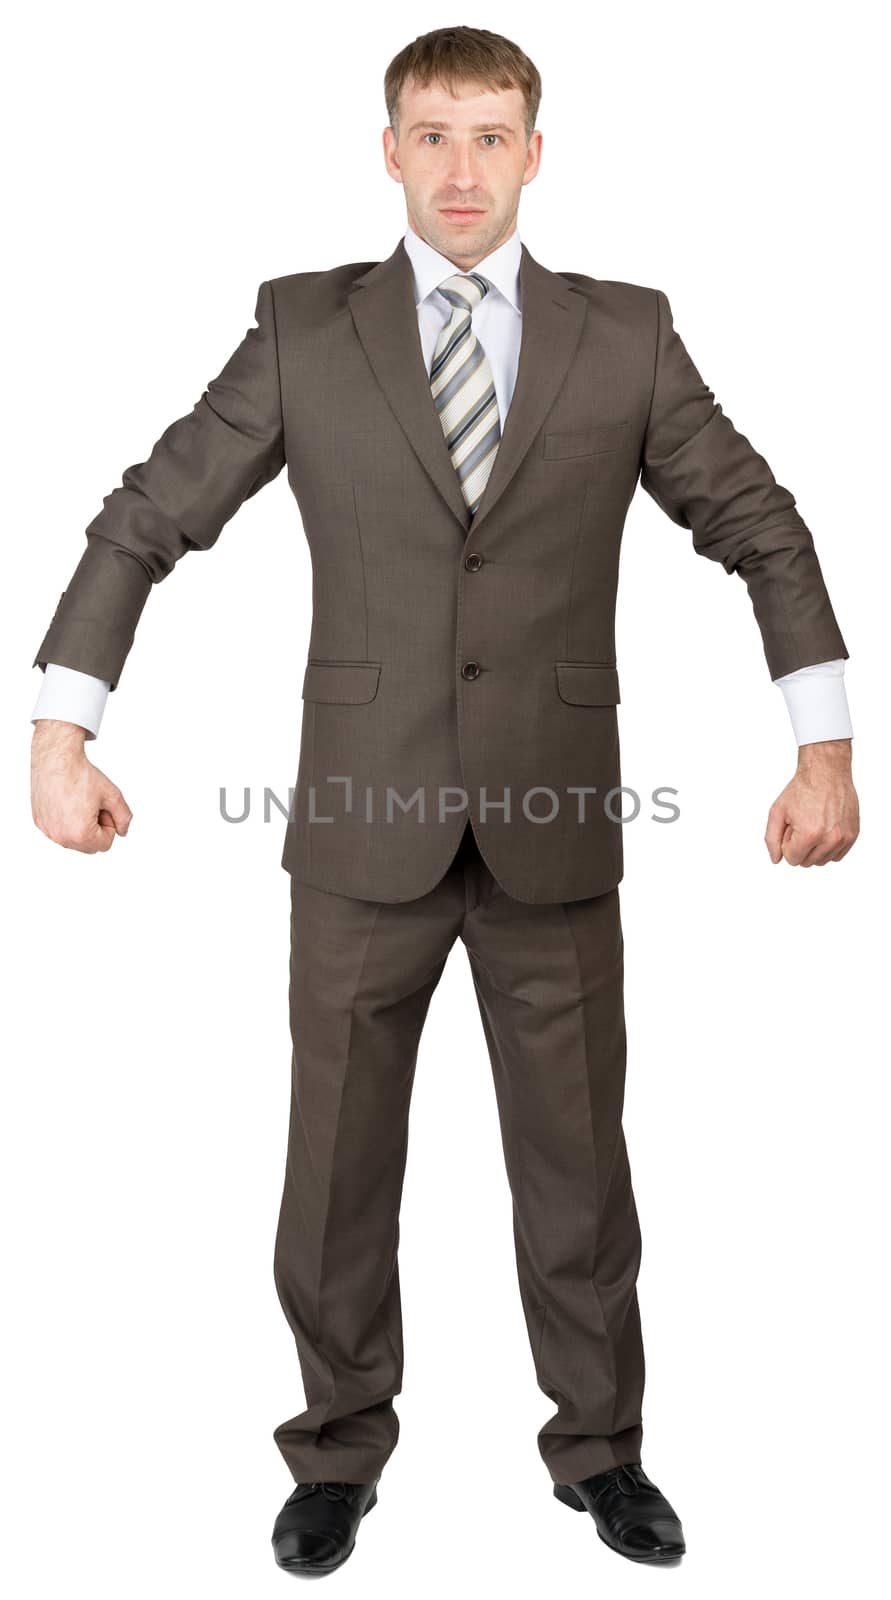 Businessman in suit ready to work isolated on white background